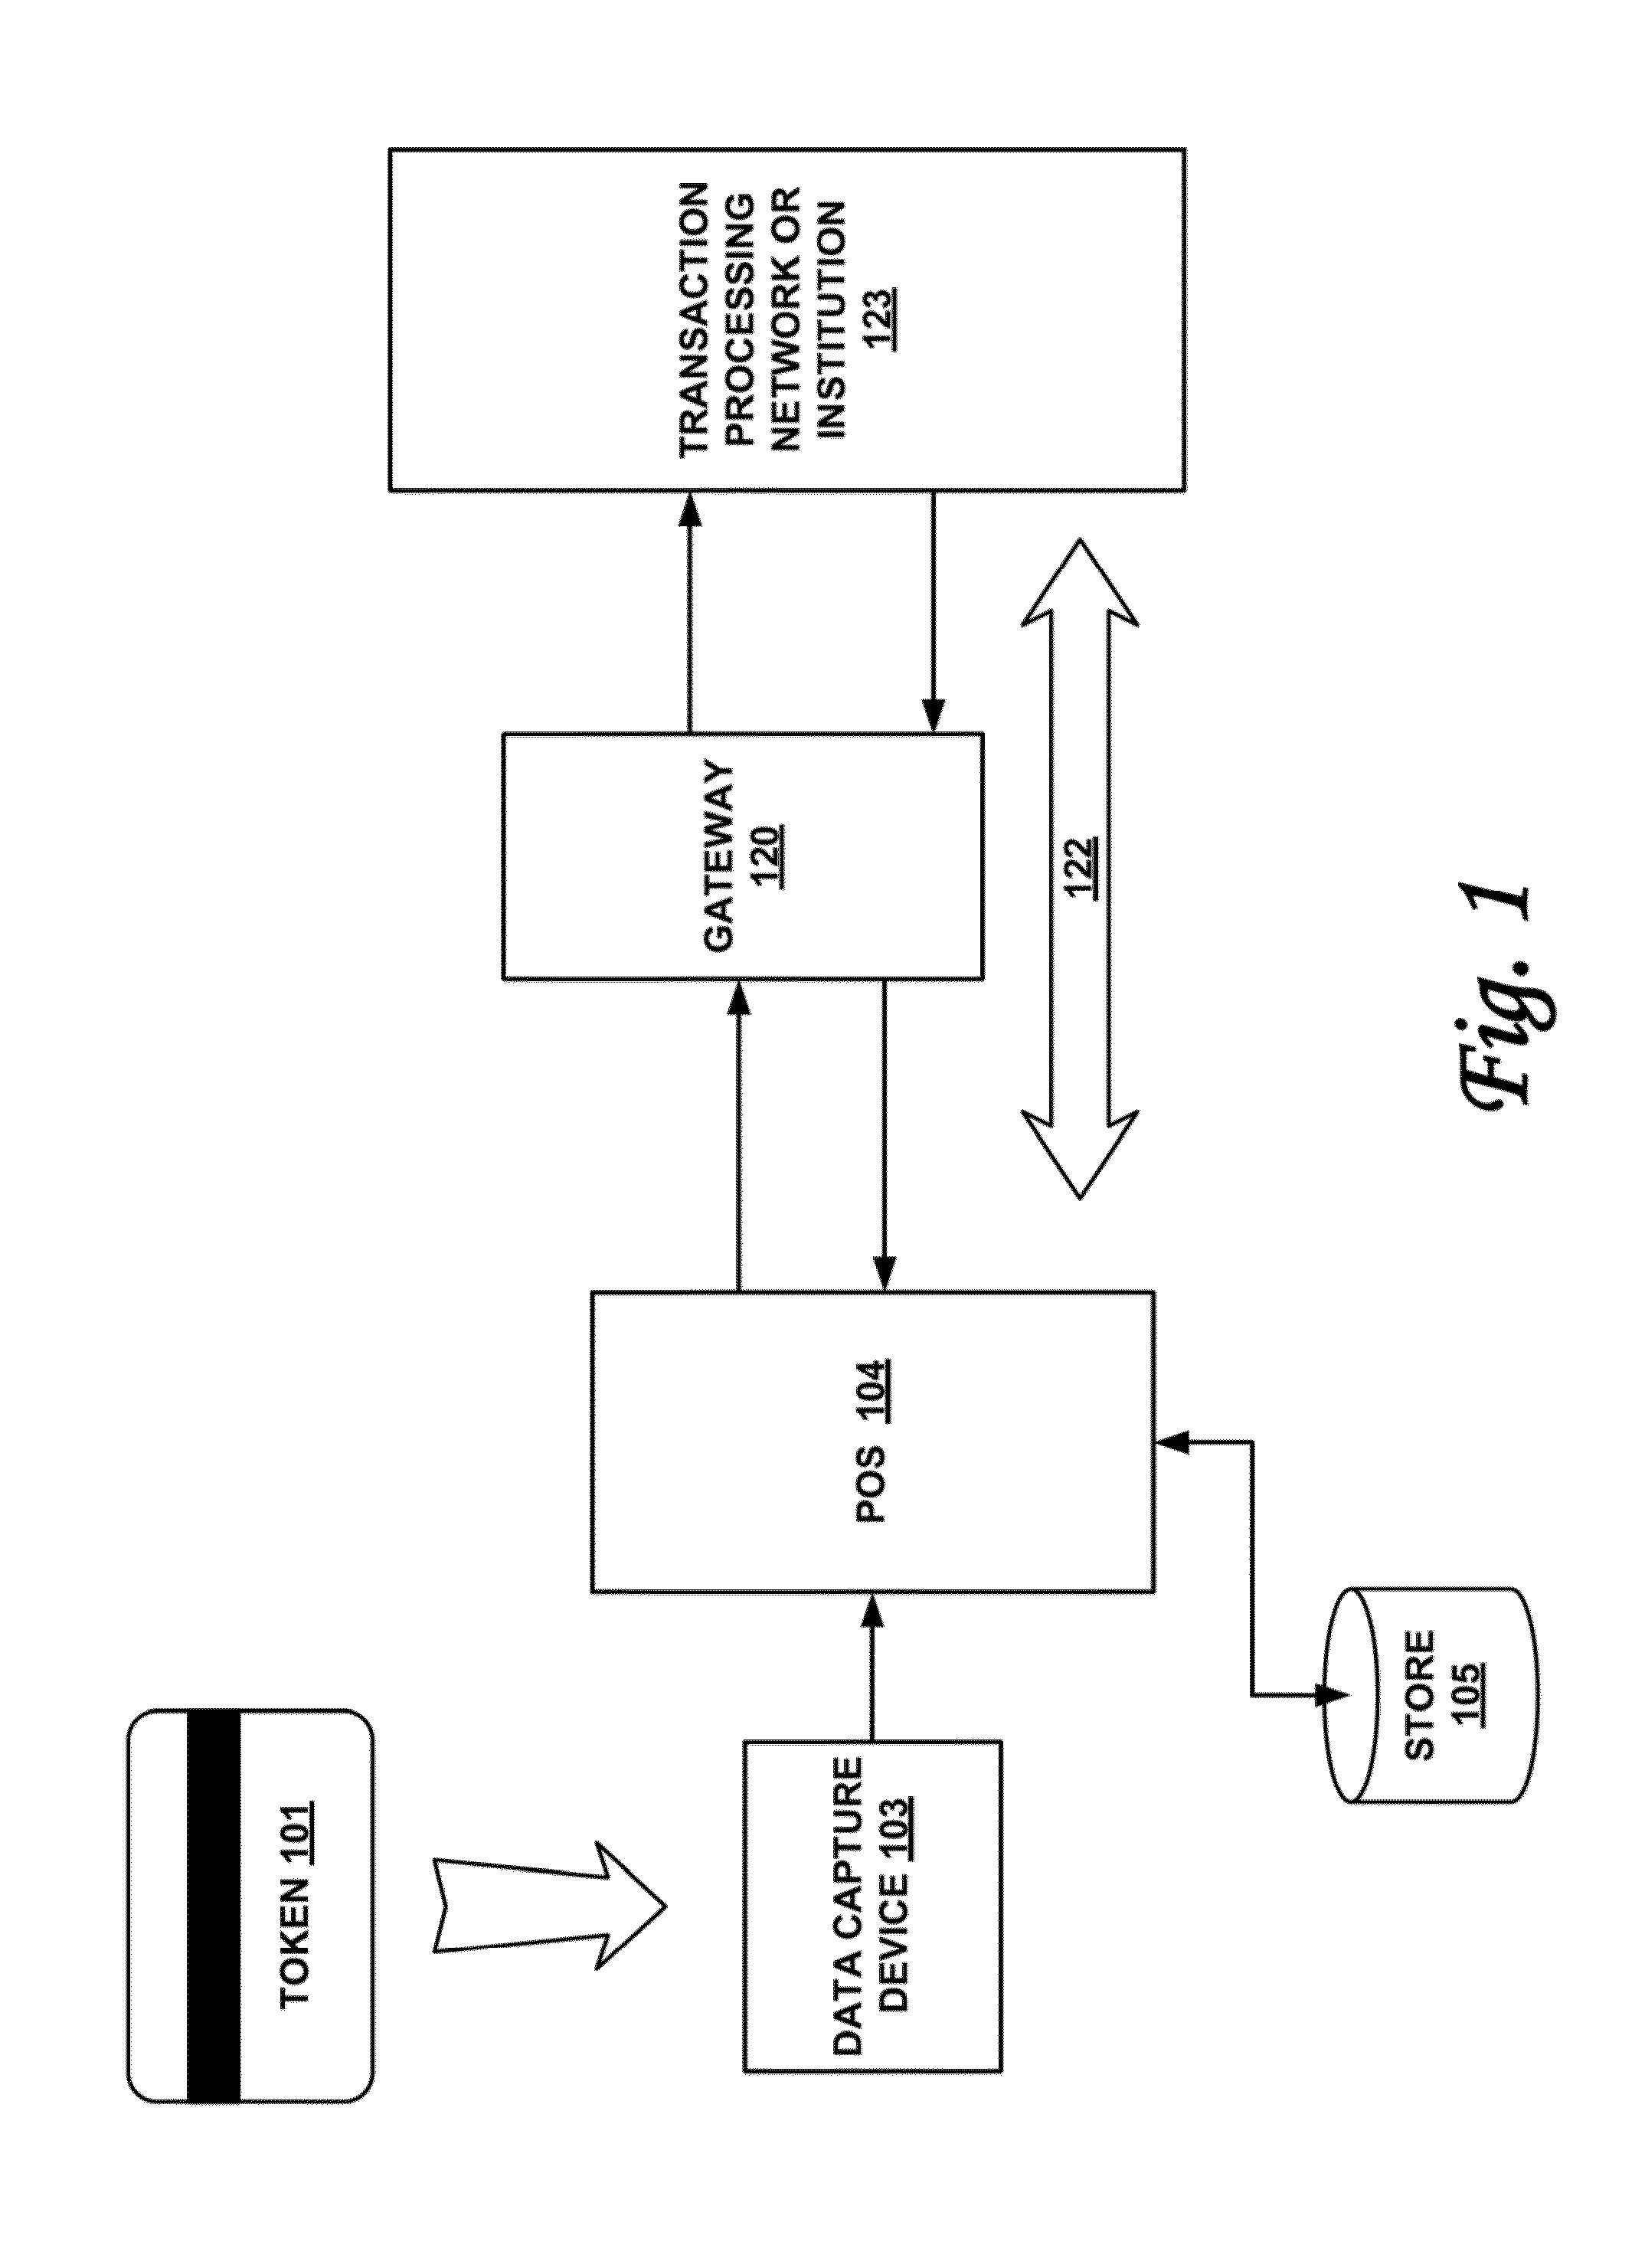 Secured transaction system and method